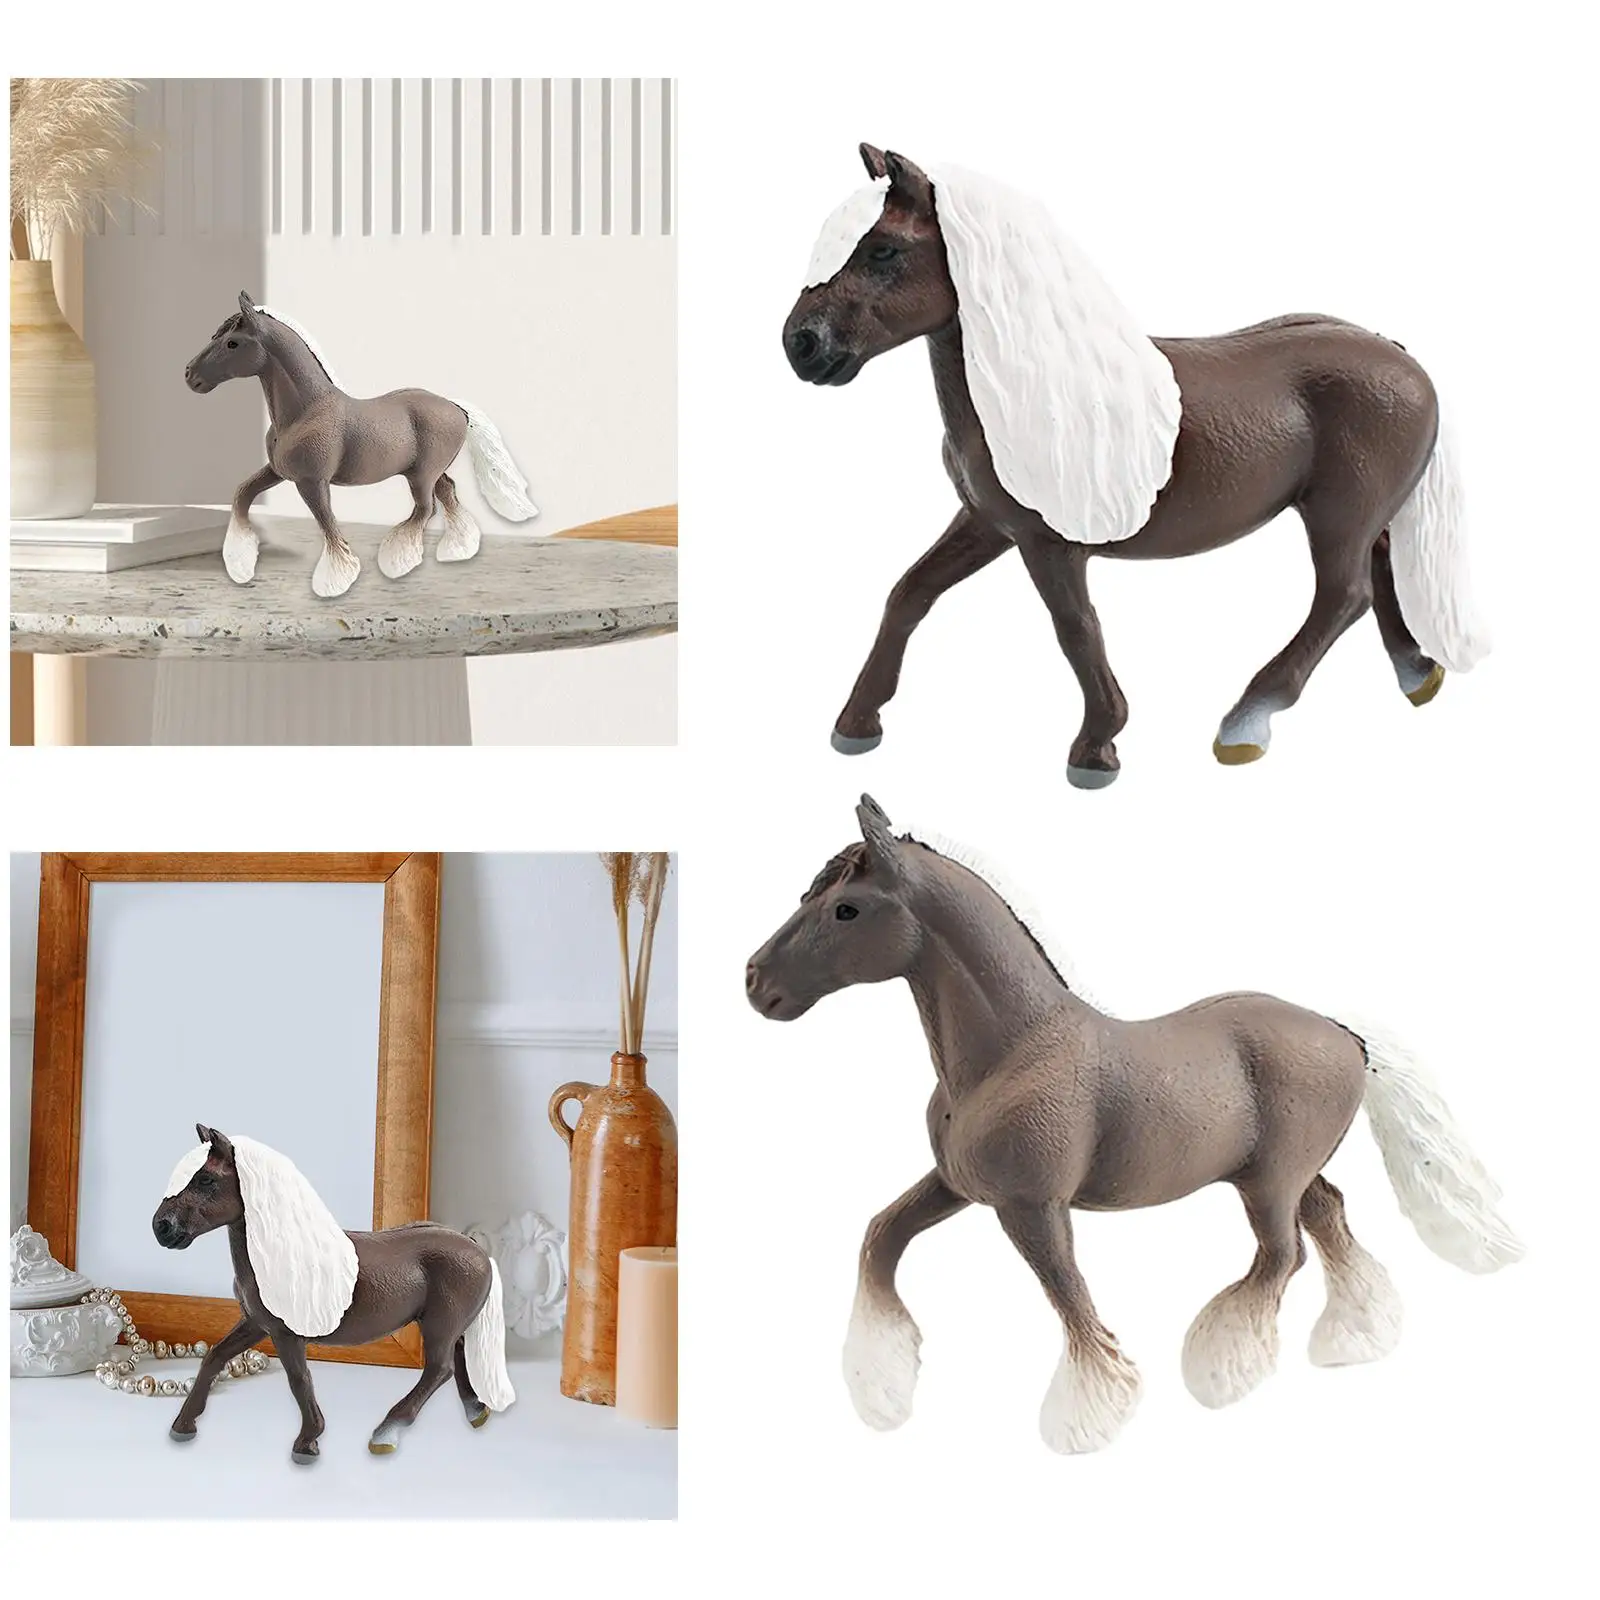 Horse Model Realistic Animal Playset Model Party Favors Animals Figures for Desktop Decor Cake Toppers Ornament Boys Toddlers